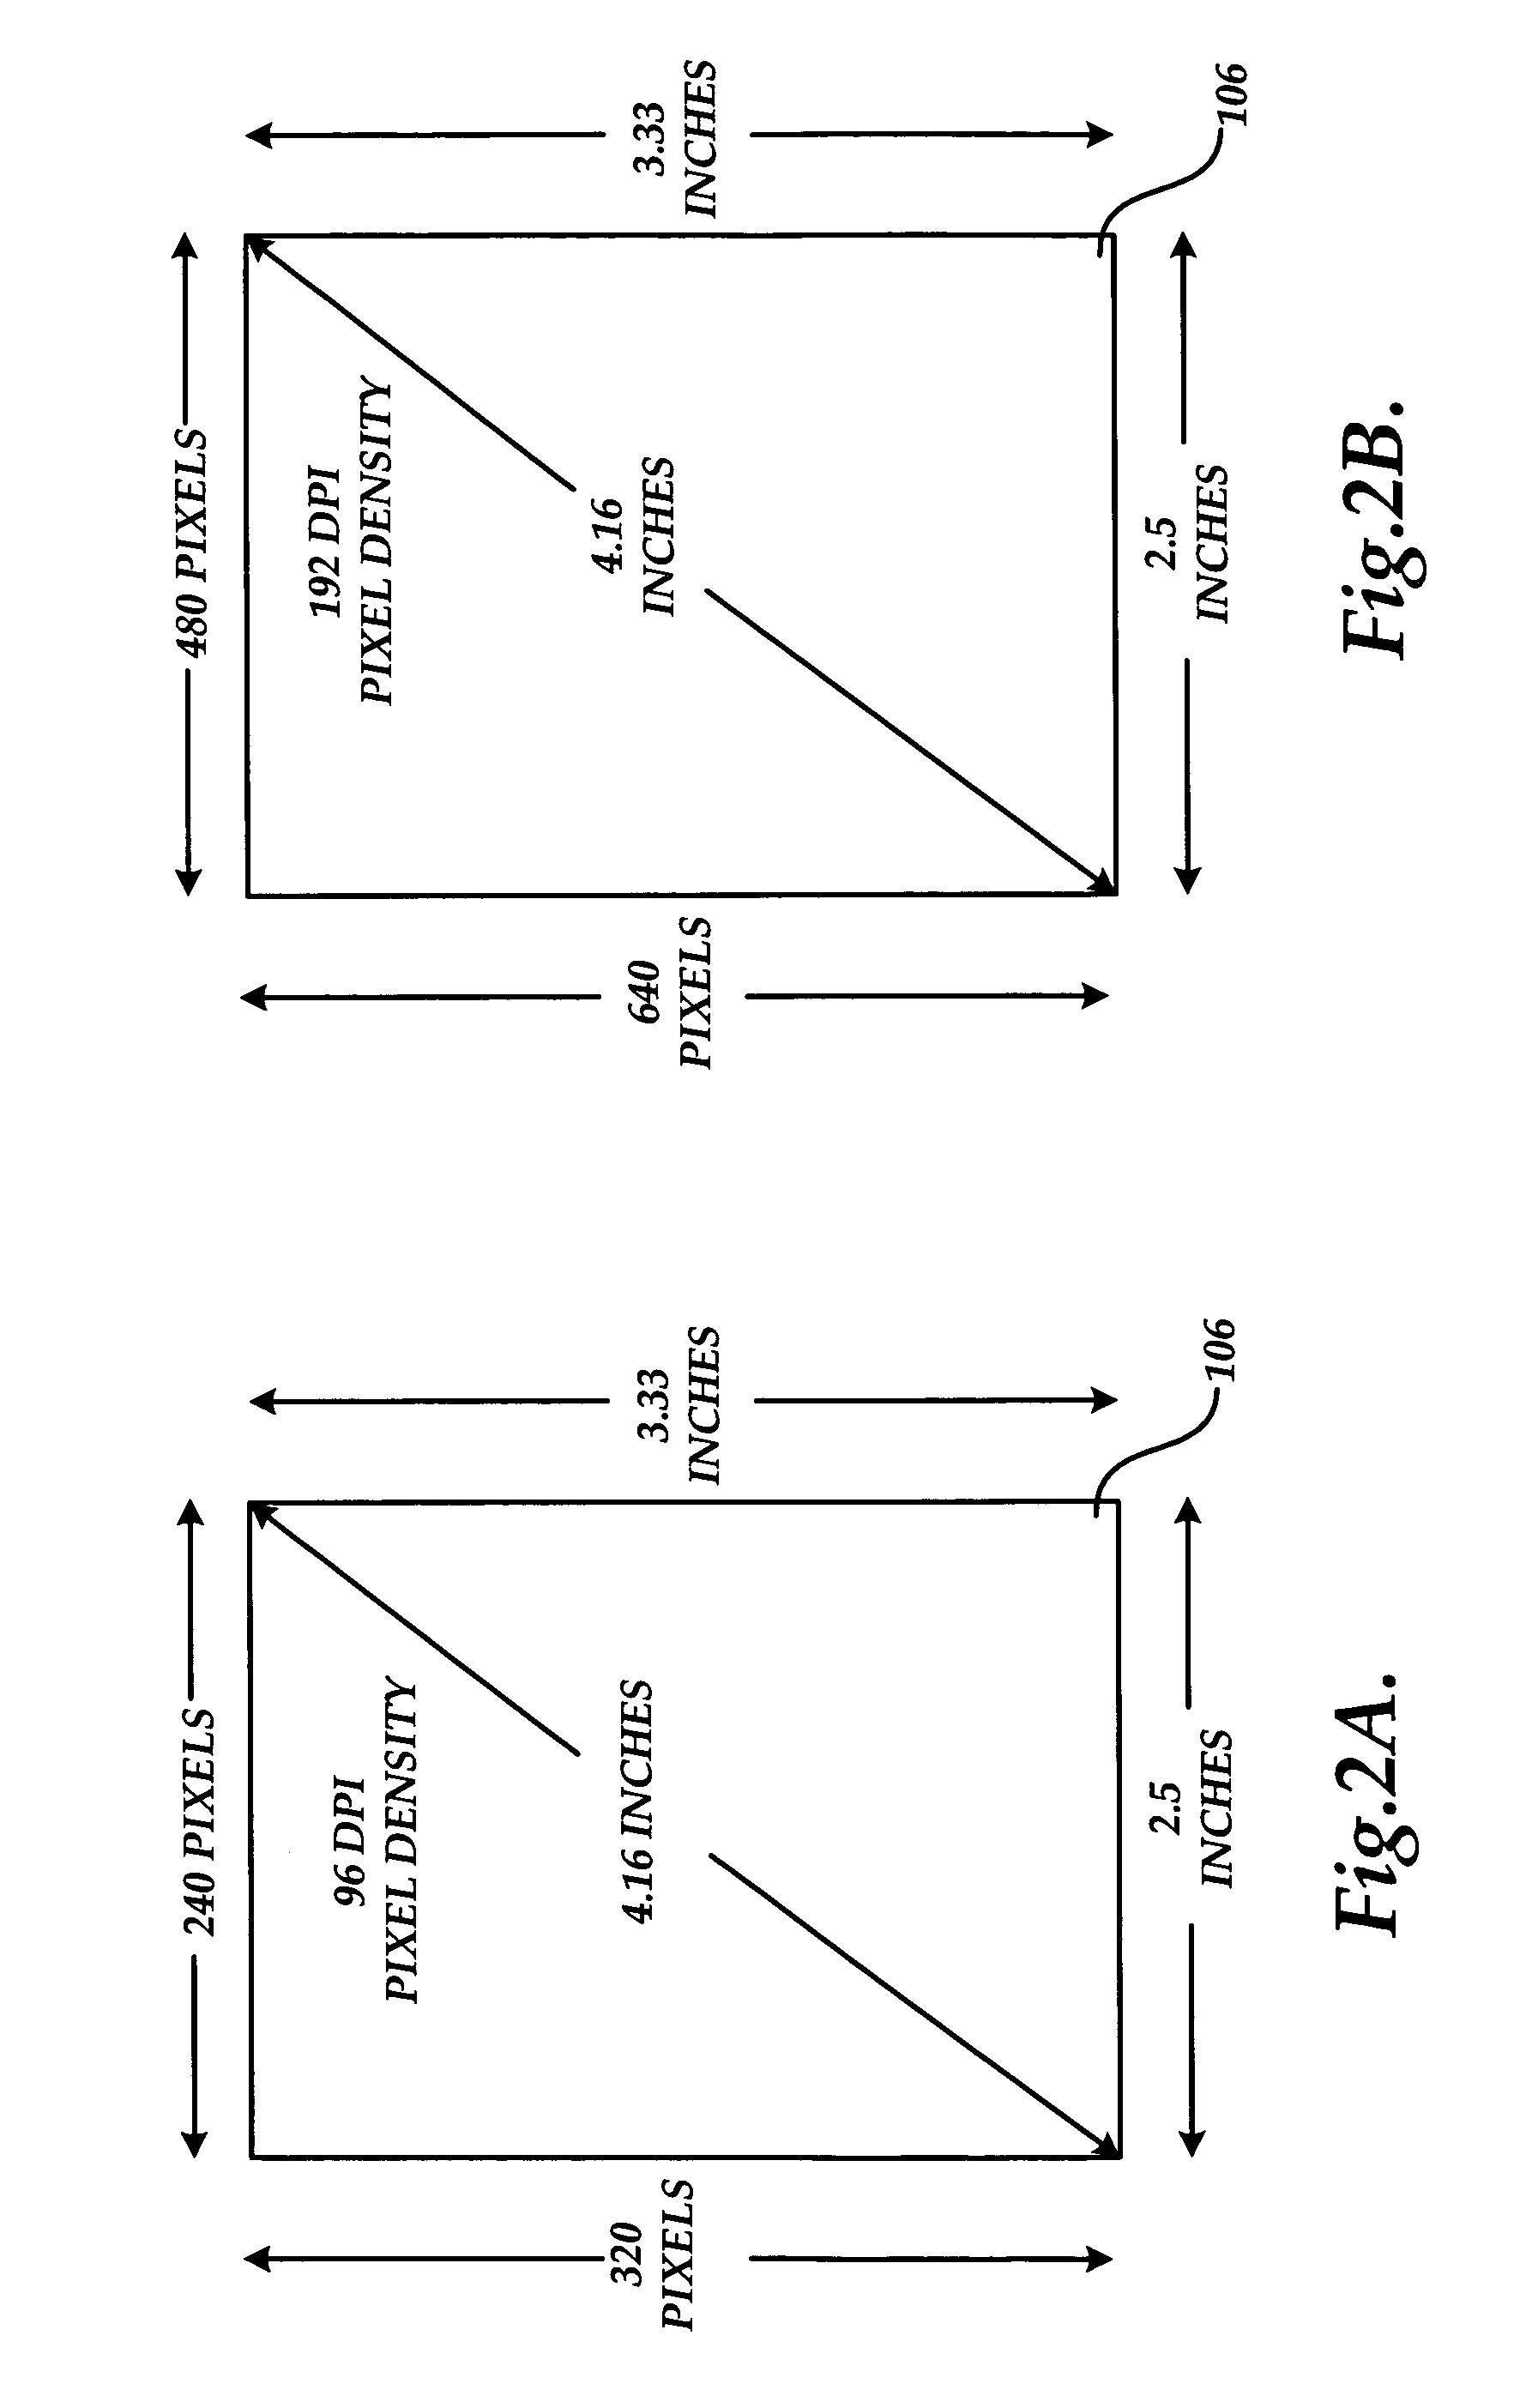 Method and apparatus for enabling application program compatibility with display devices having improved pixel density